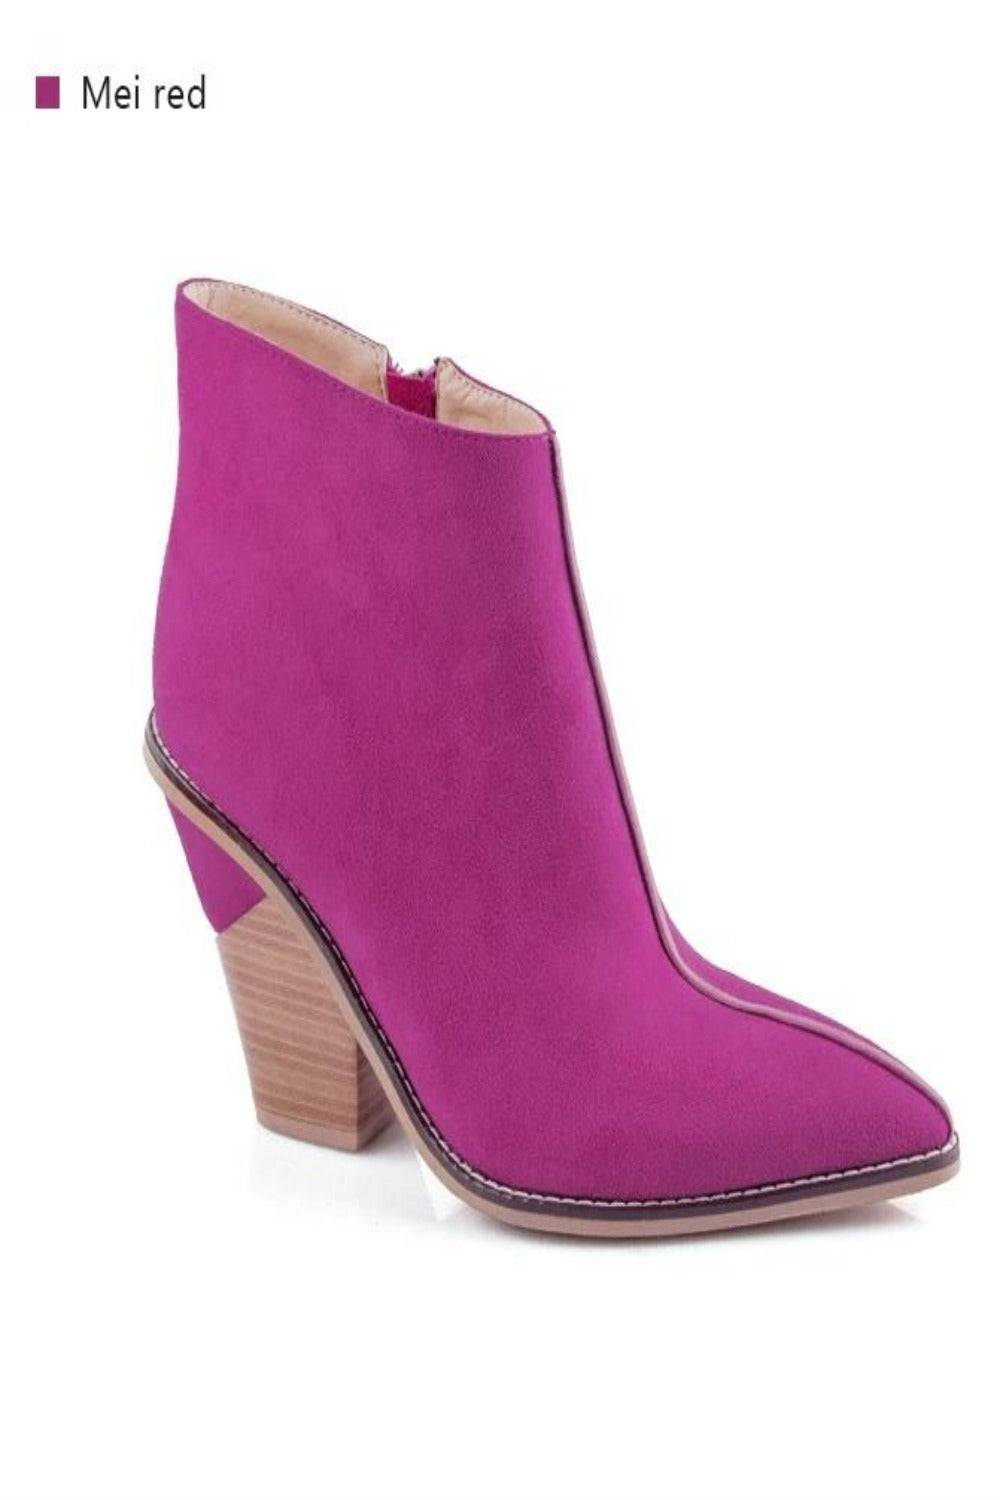 Thick High Heels Pointed Toe Western Cowboy Ankle Boots - TGC Boutique - Ankle Booties